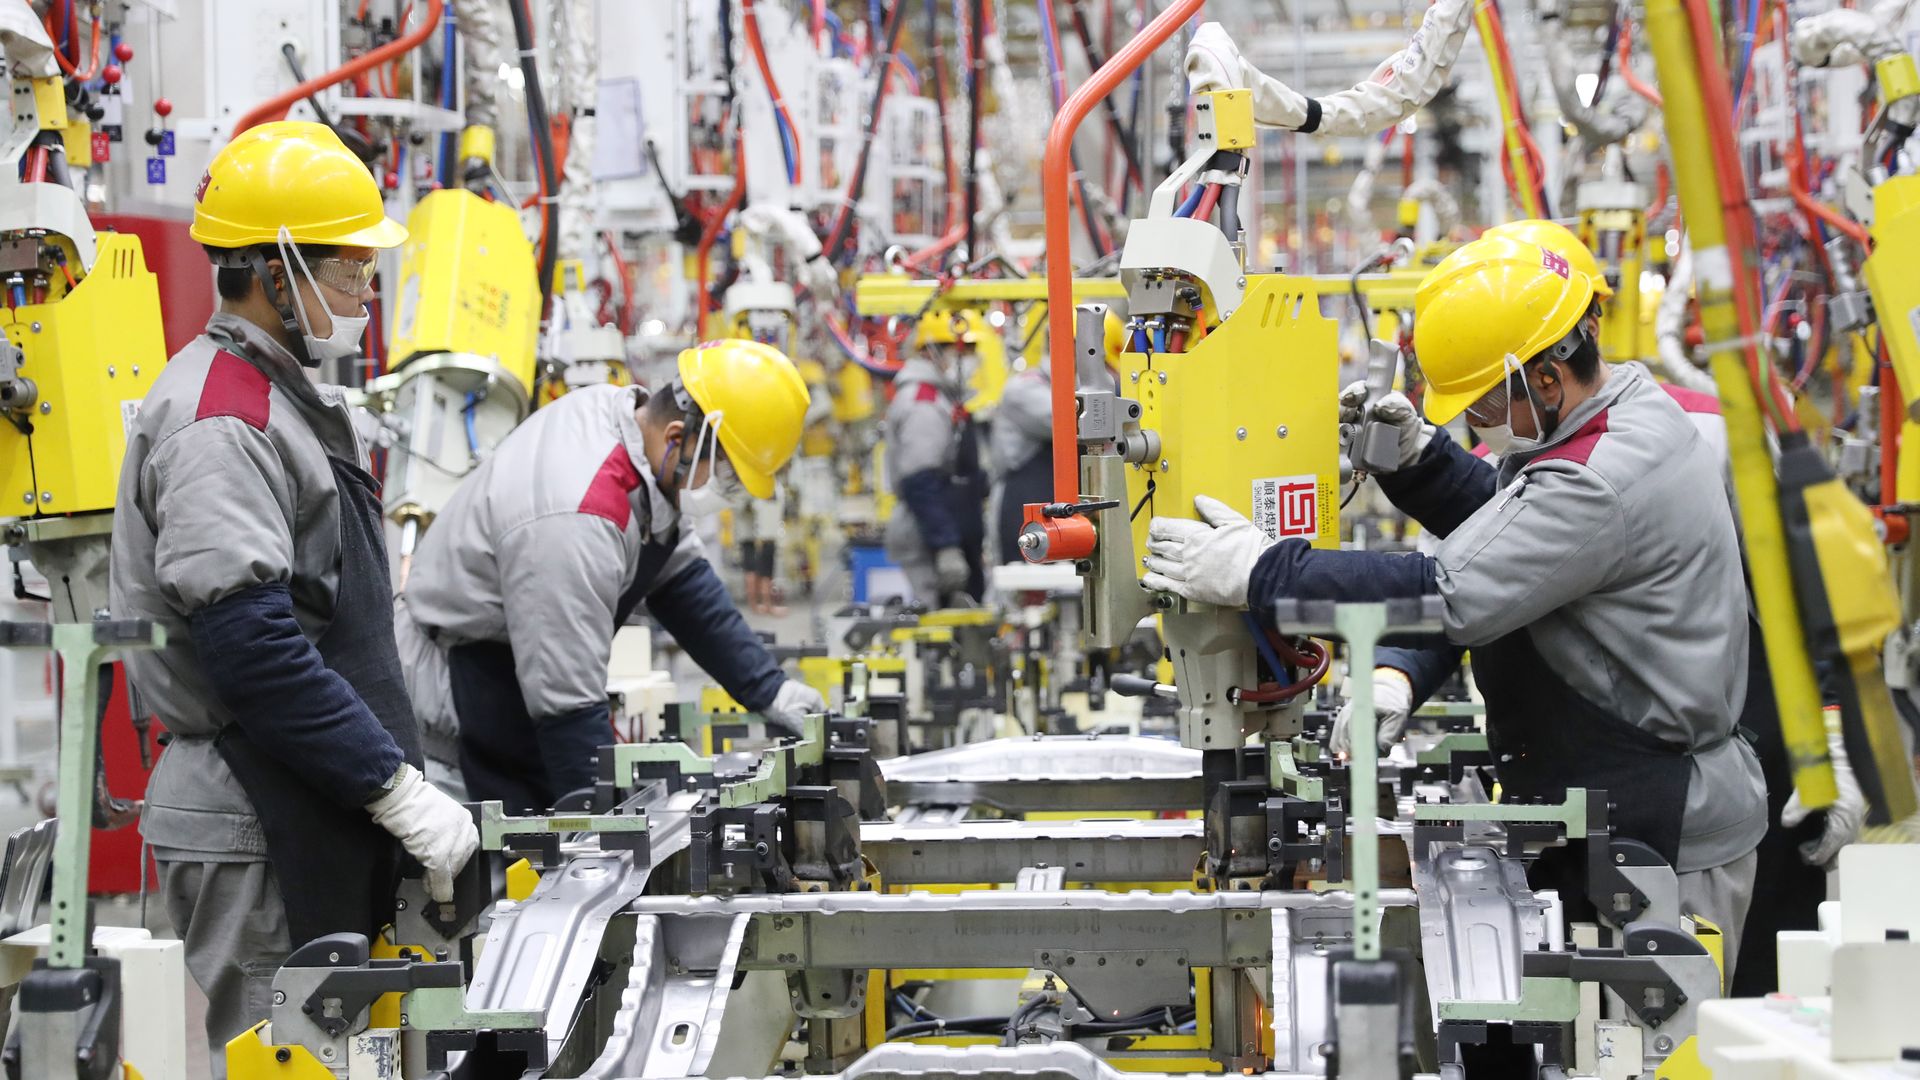 Employees work on the assembly line of vehicles at a factory of Beijing Automobile Works (Qingdao) Co., Ltd. on January 14, 2023 in Qingdao, Shandong Province of China. 